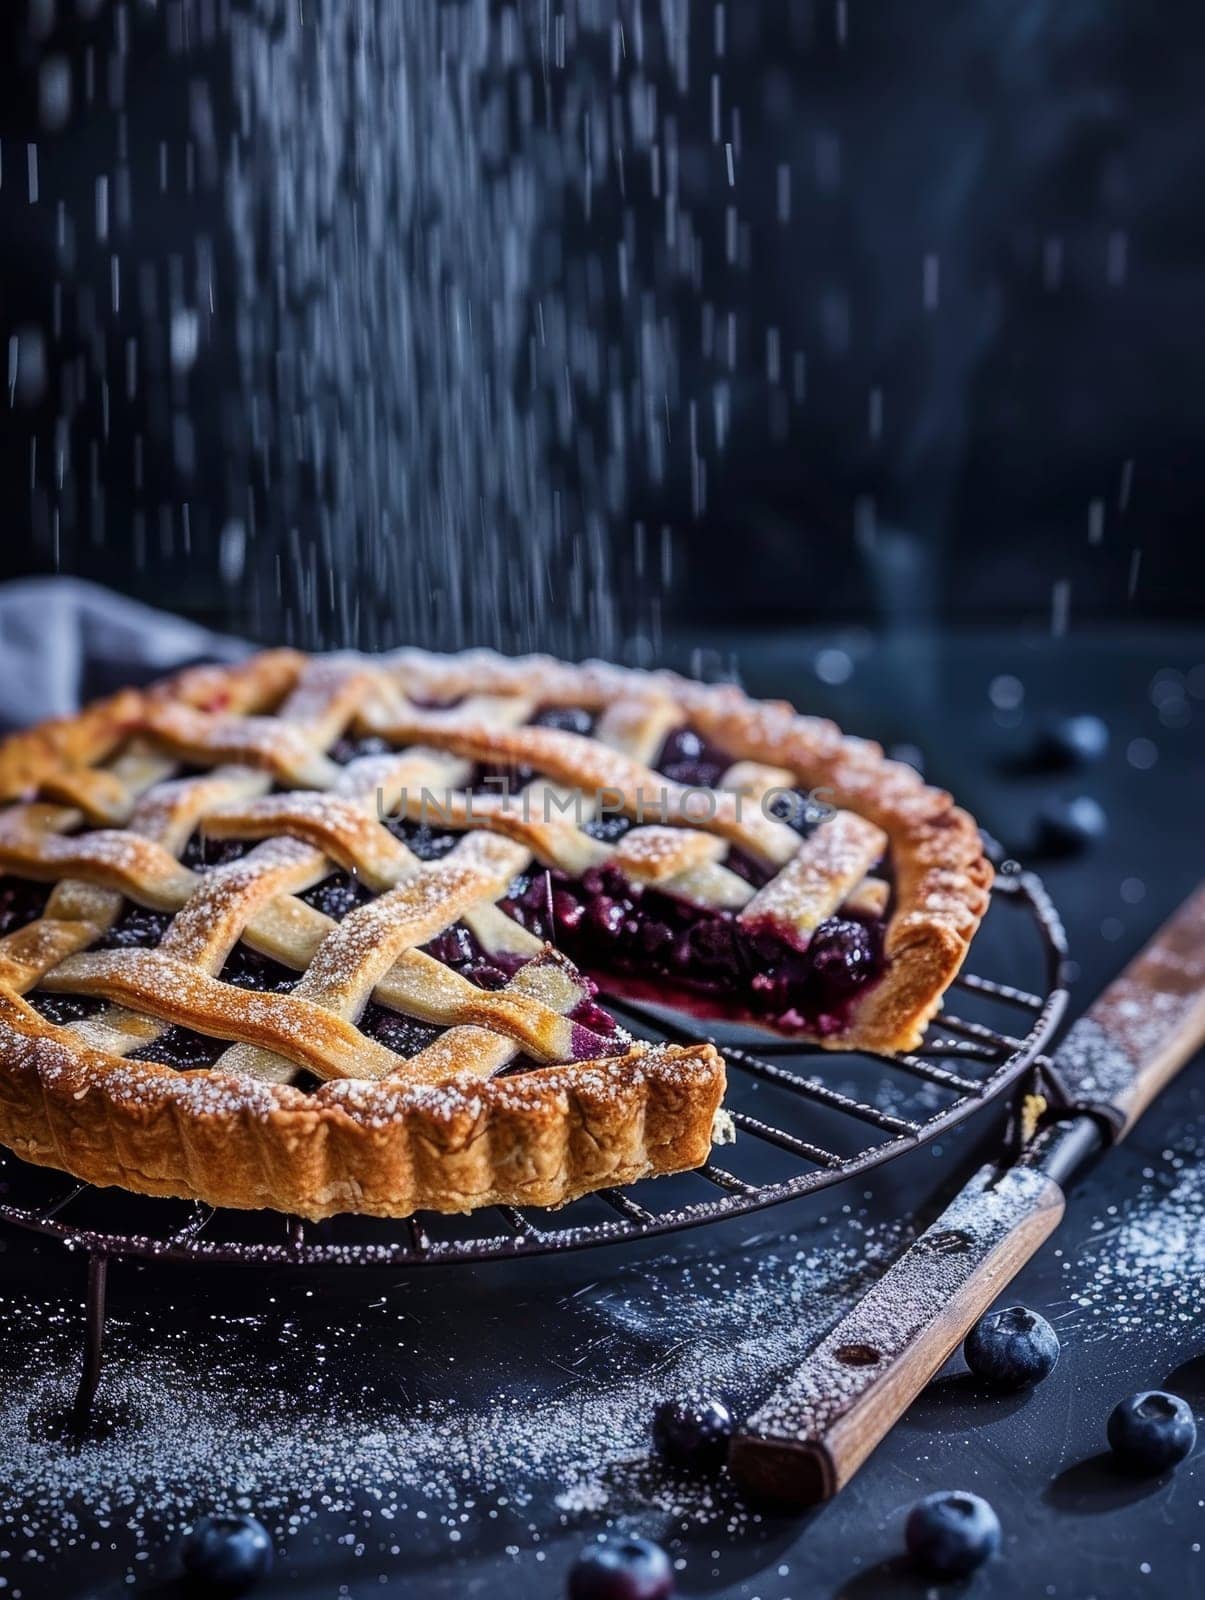 Authentic Finnish mustikkapiirakka, a delectable blueberry pie fresh from the oven, presented on a cooling rack with a gentle dusting of sugar - a mouthwatering representation. by sfinks